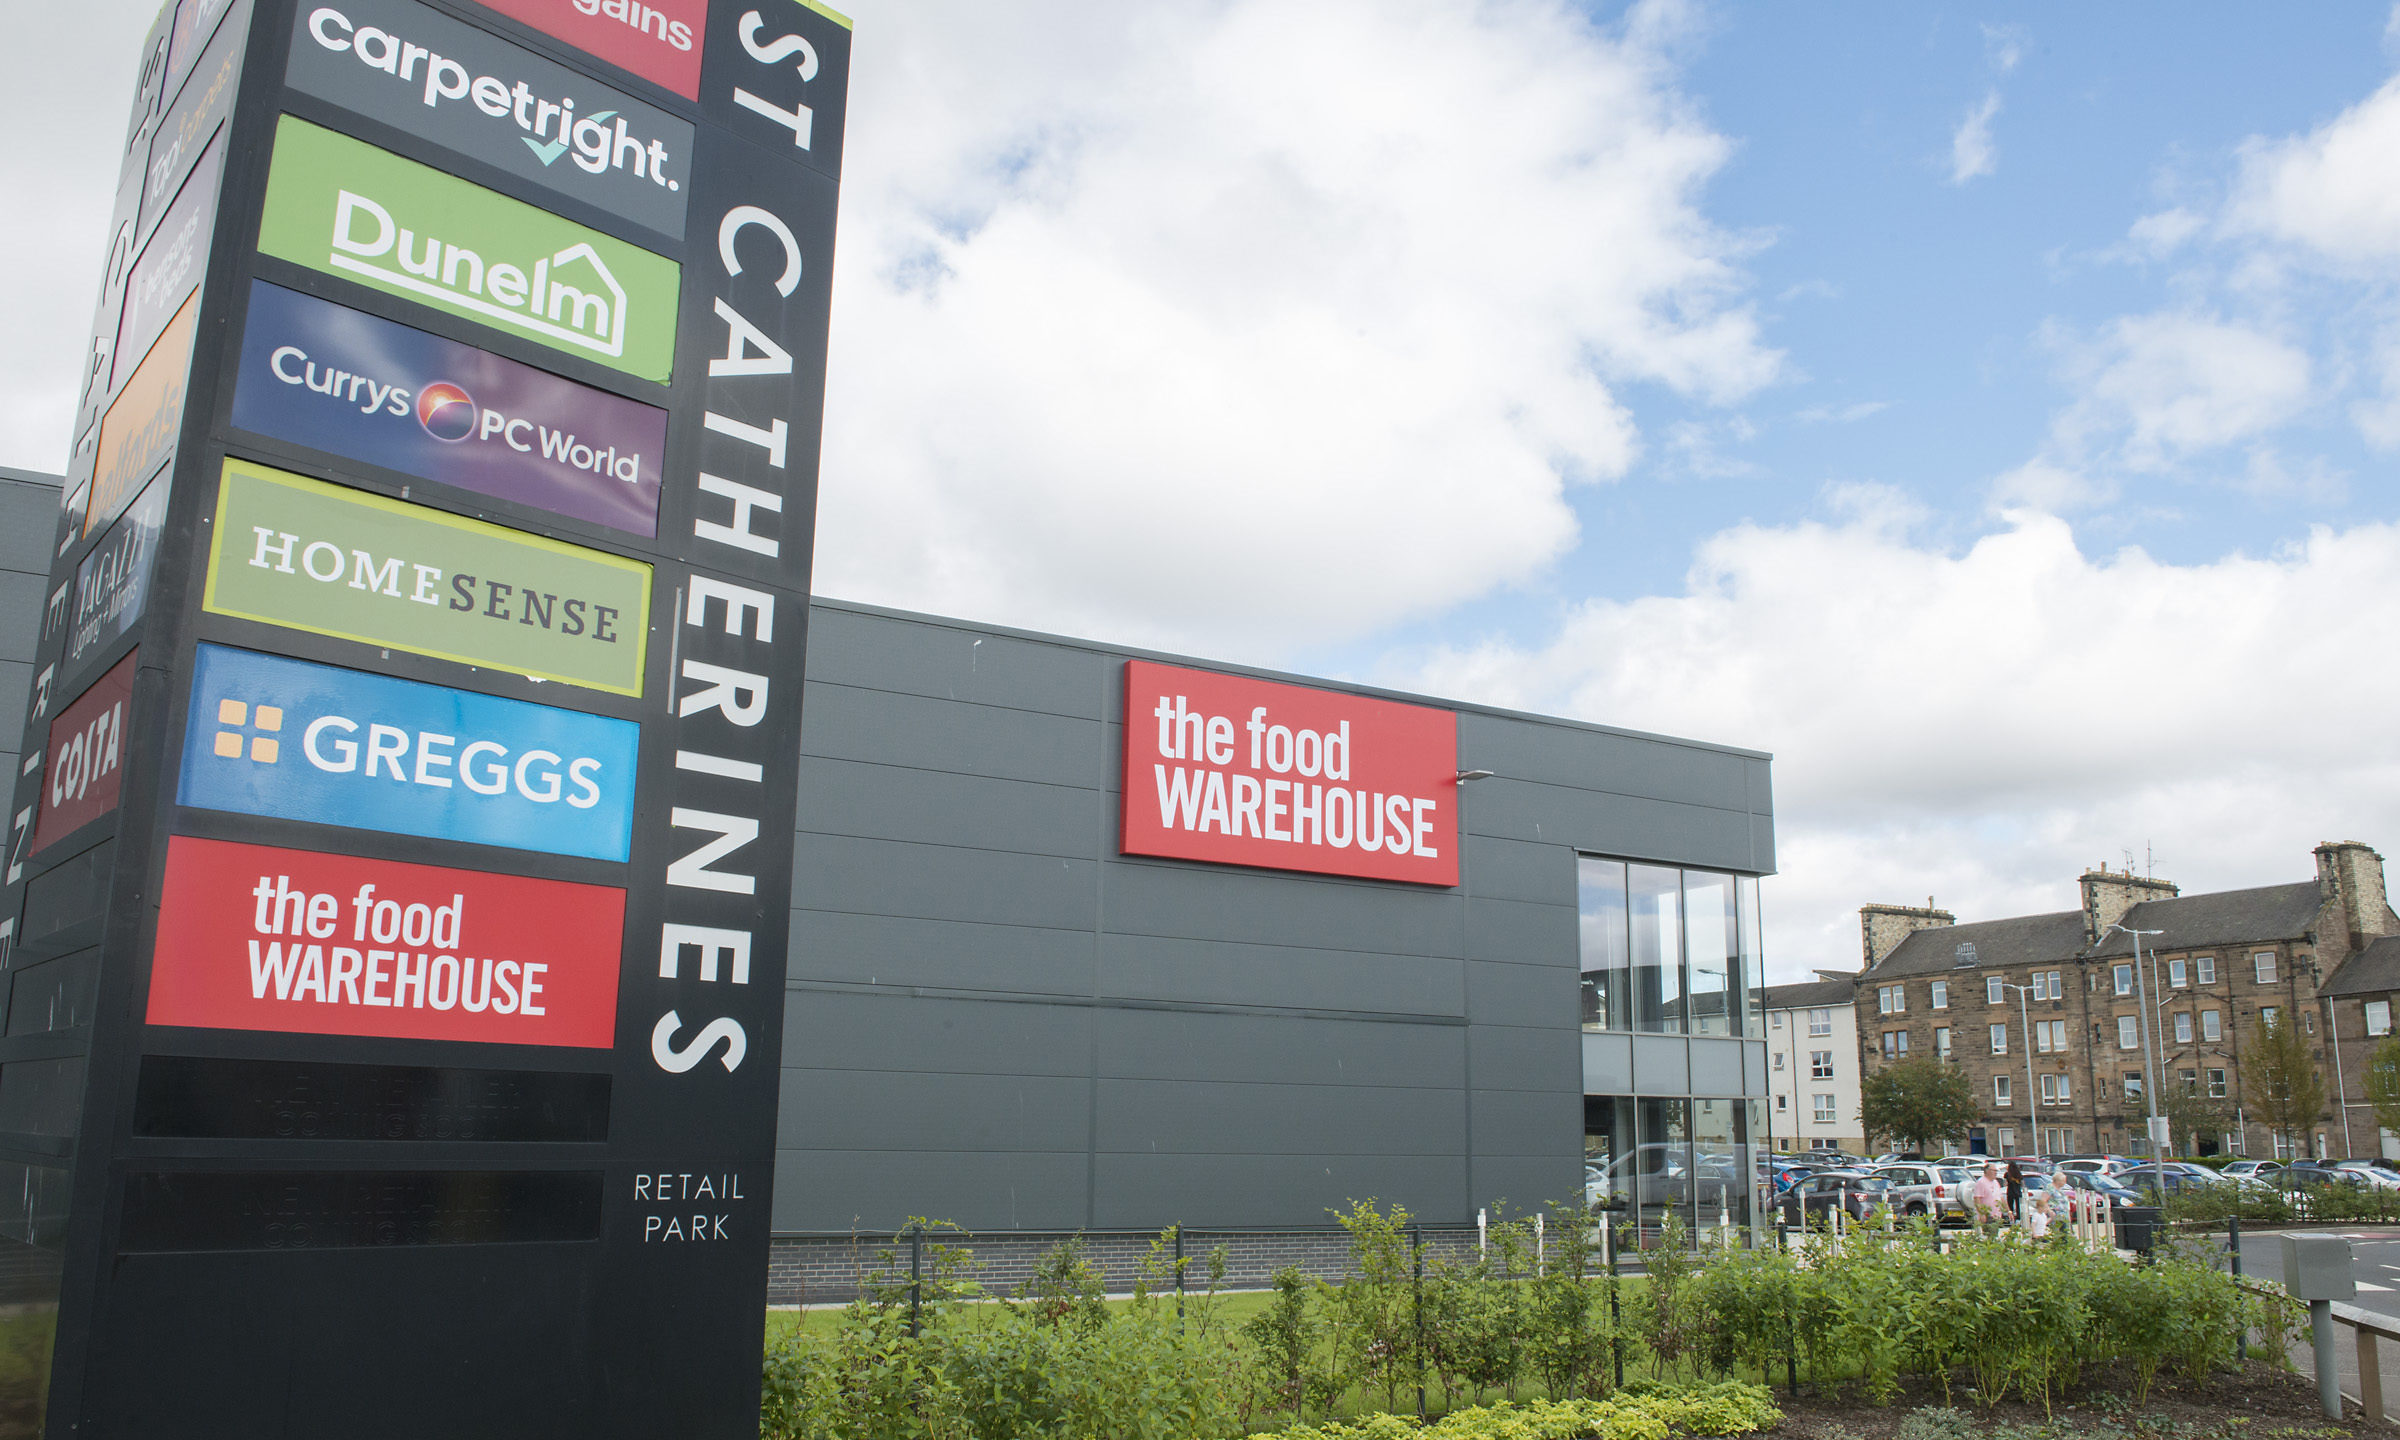 The Food Warehouse sign at St Catherine's Retail Park.